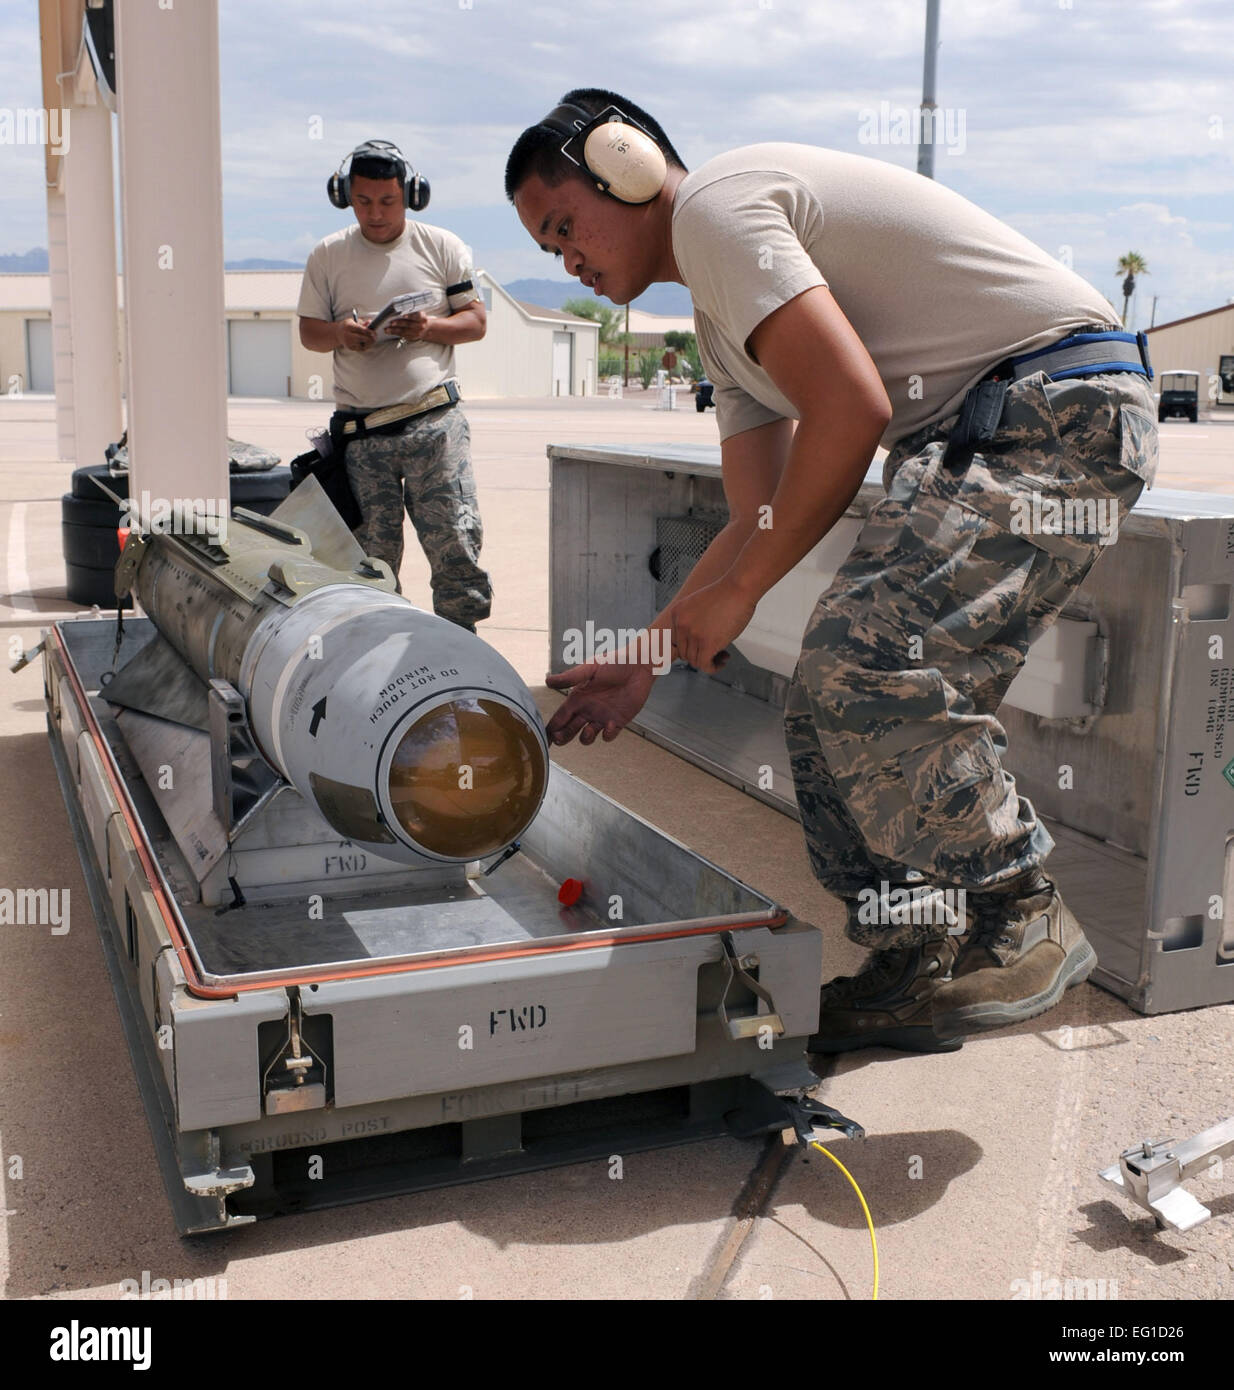 Air Force Staff Sgt. Alston Biacan performs missile preparation on an AGM-65 during a load crew competition on the Davis Monthan Air Force Base, Ariz., flight line July 11, 2011.The competition is held quarterly and consists of a uniform inspection, written tests and performance tests.  Airman 1st Class Christine Halan Stock Photo